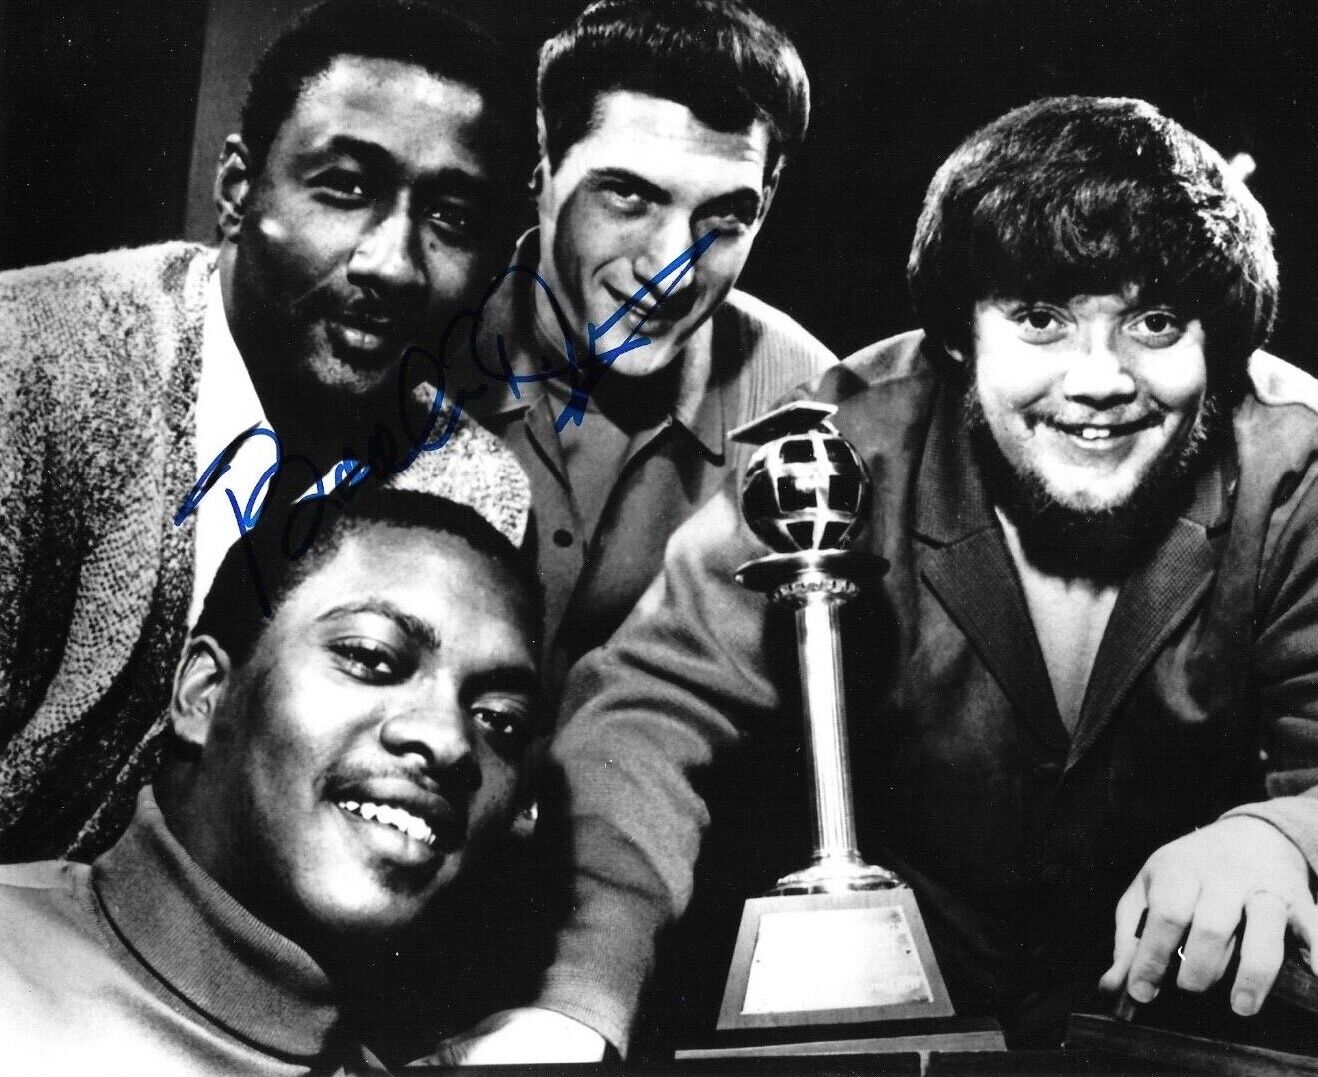 * BOOKER T. JONES * signed autographed 8x10 Photo Poster painting * BOOKER T. & THE MG'S * 4